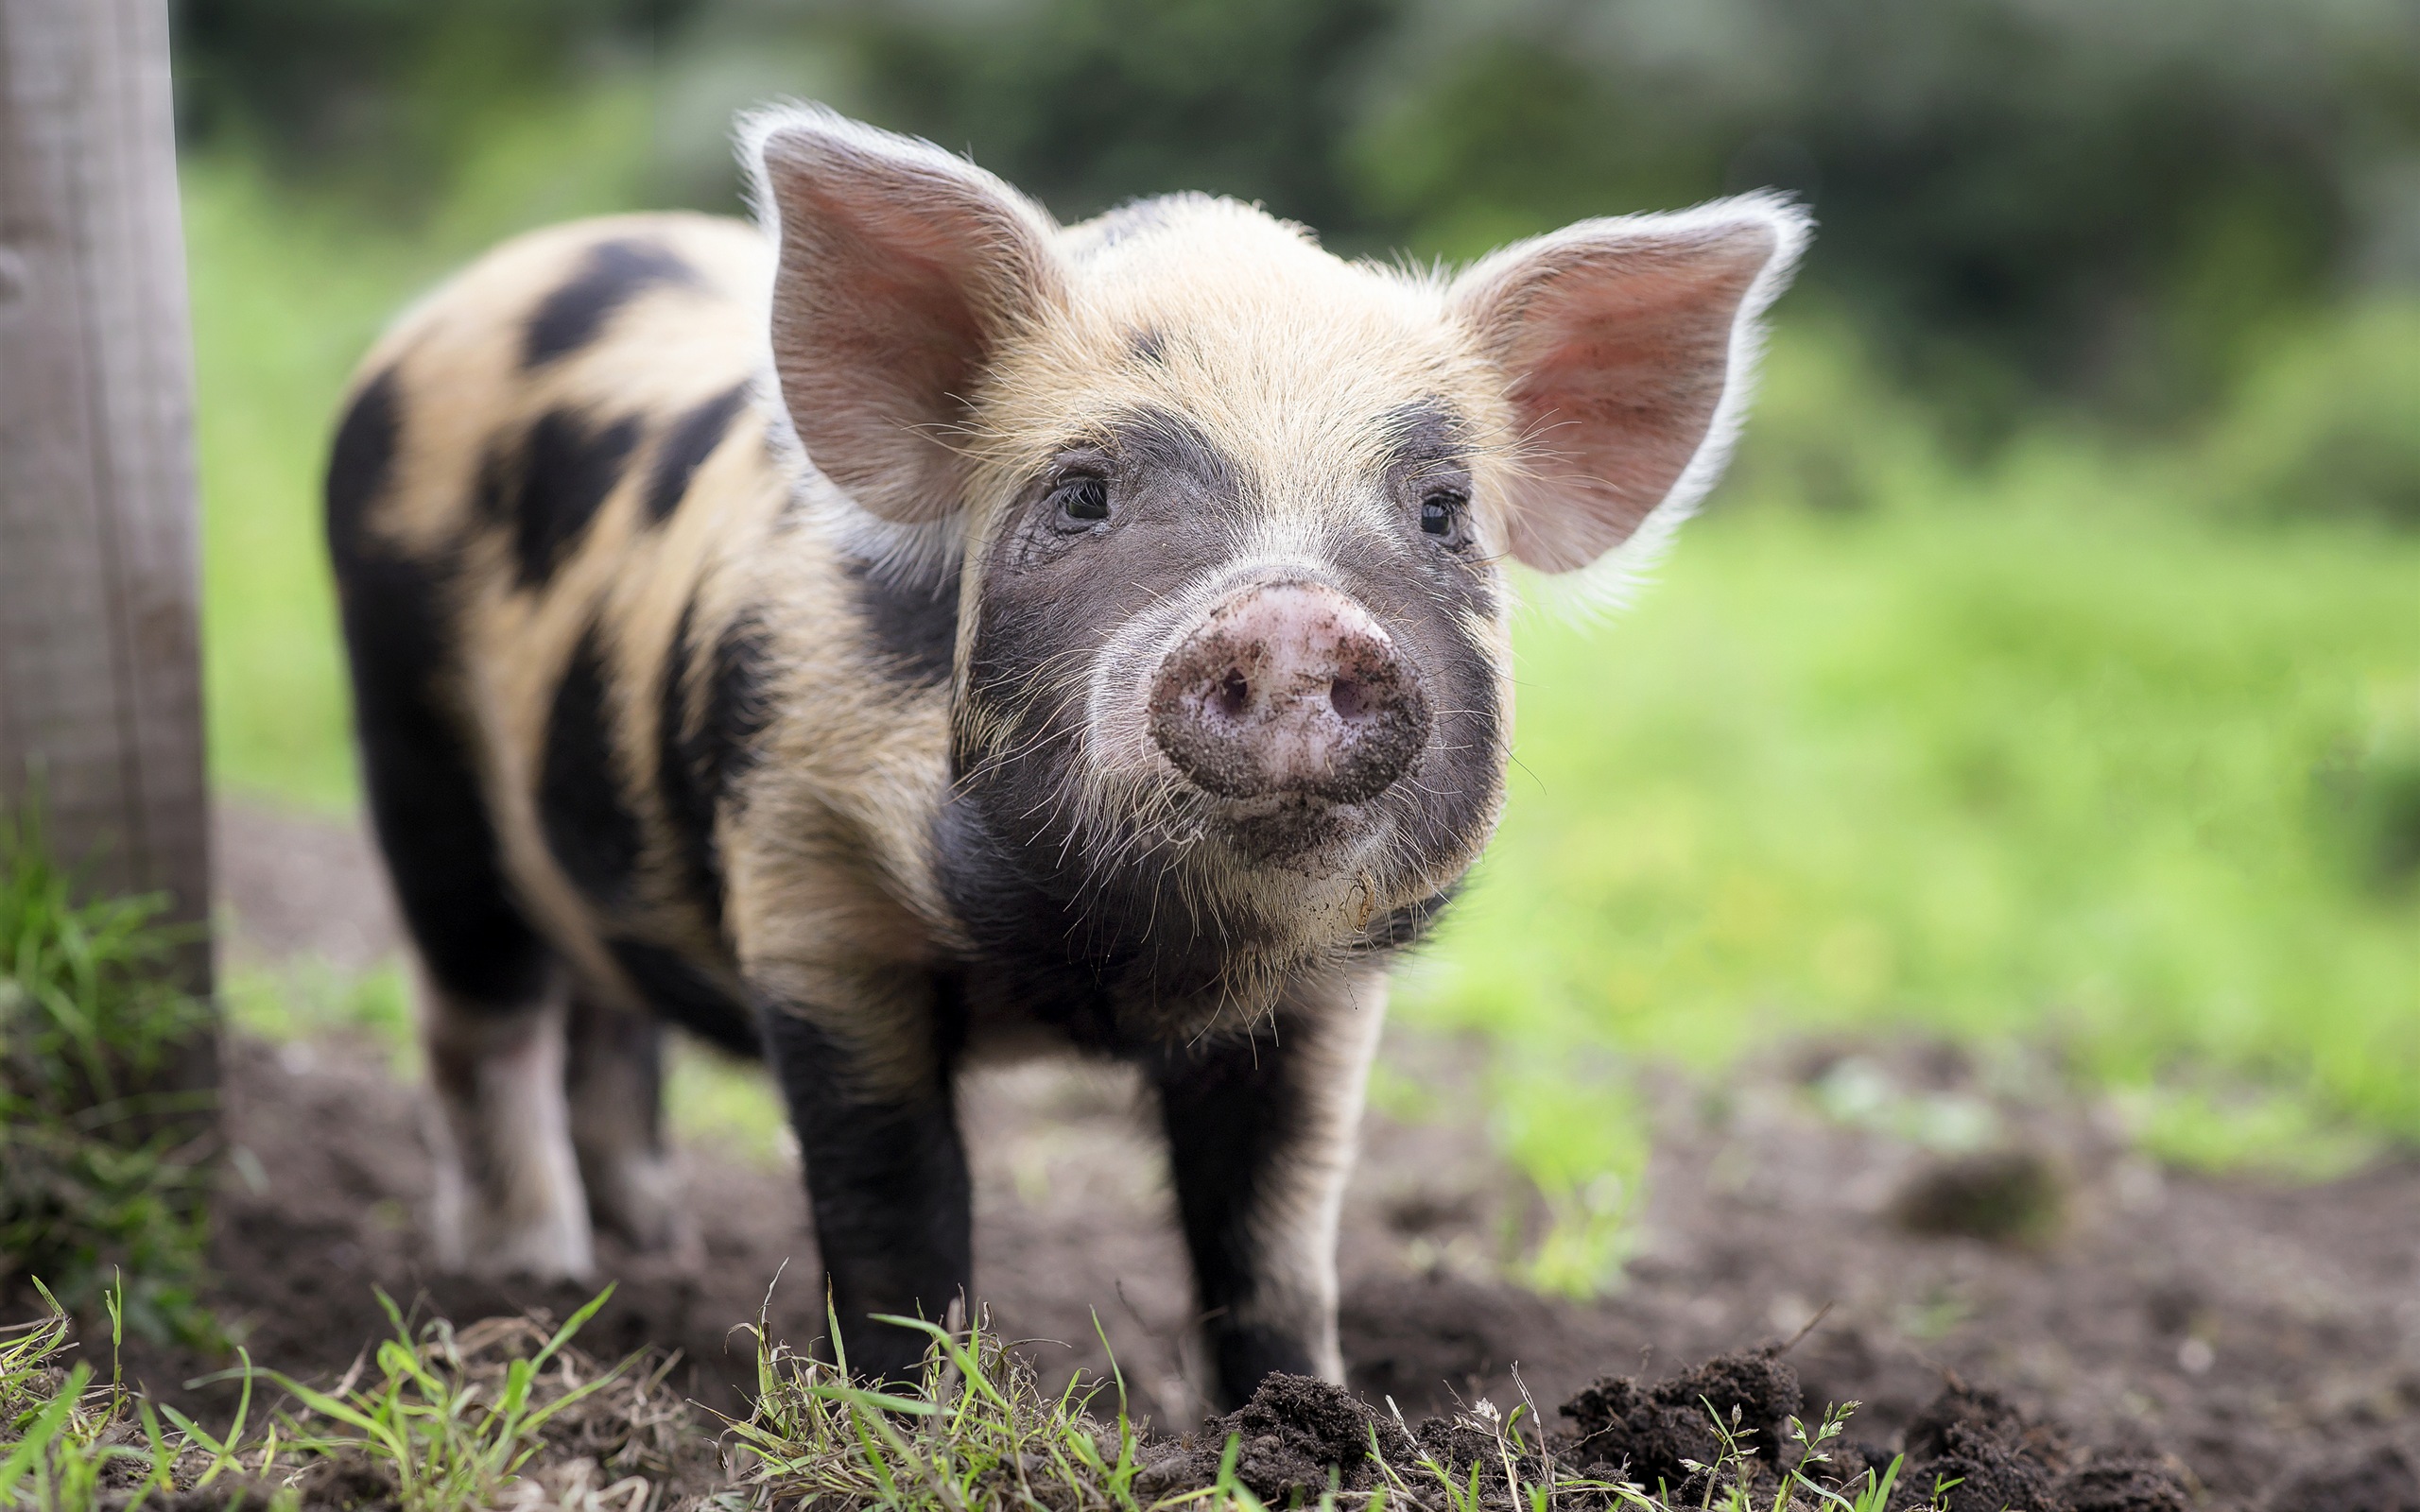 Pig Year about pigs HD wallpapers #8 - 2560x1600